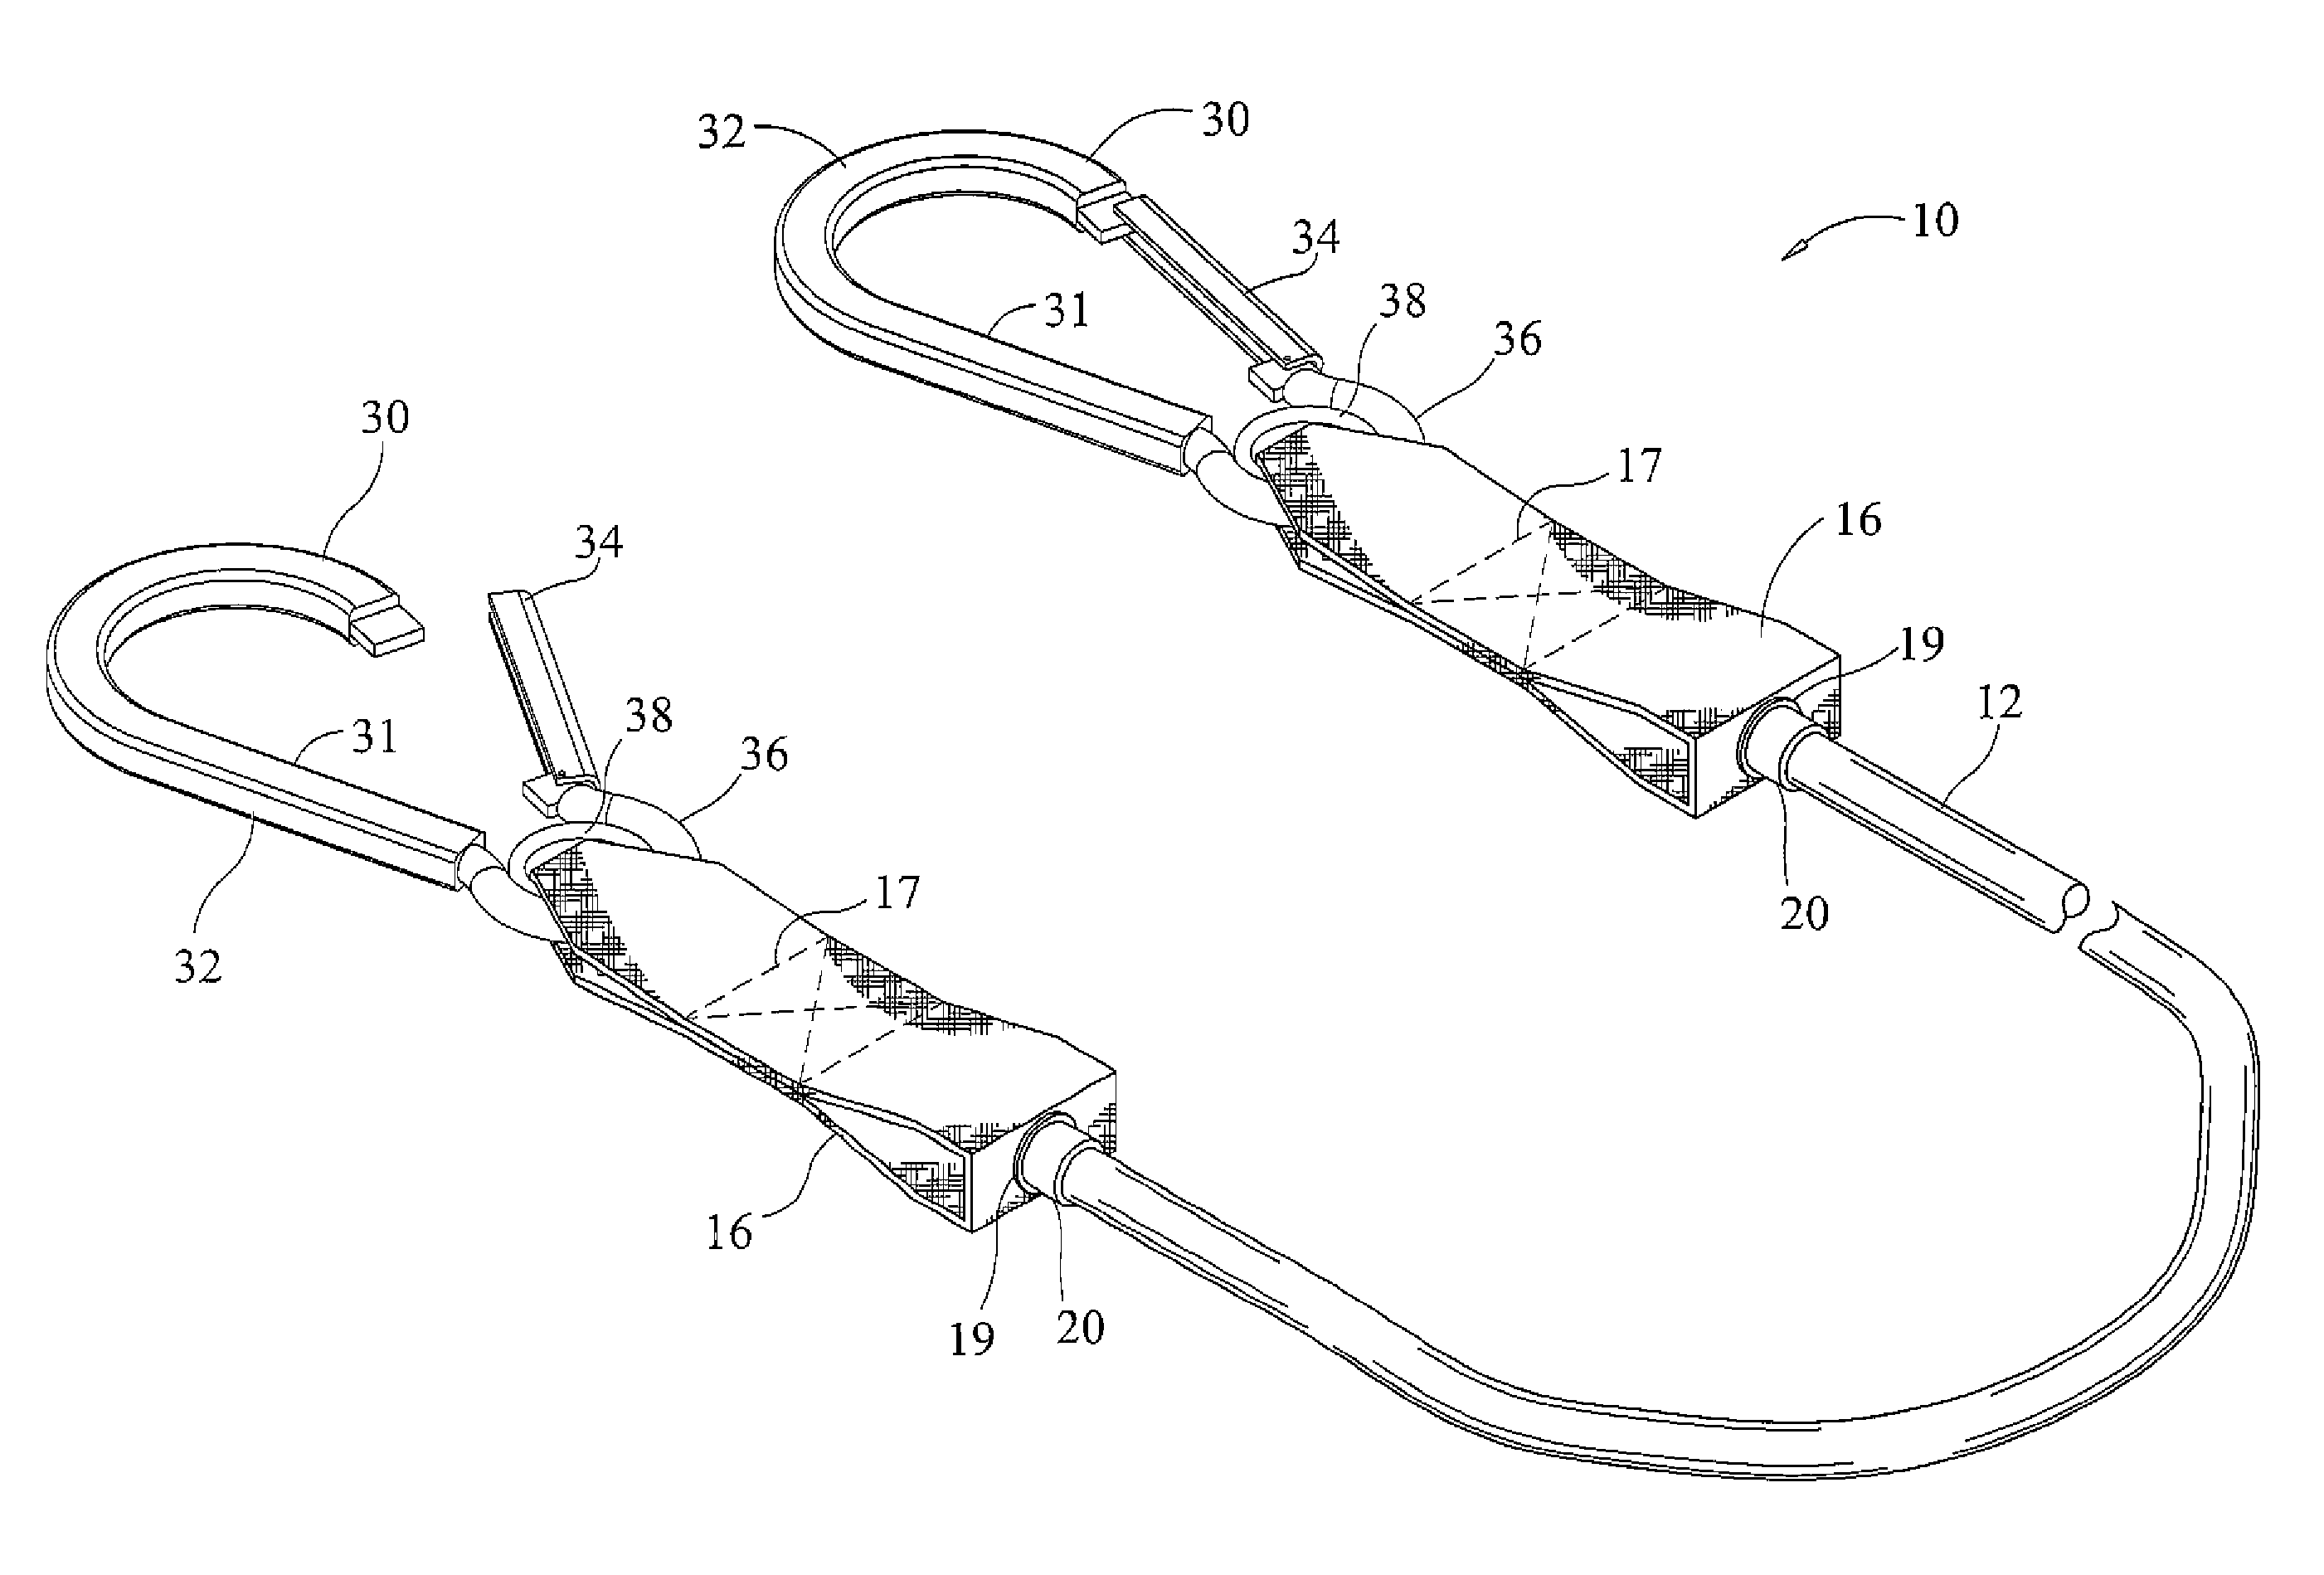 Resistance training exercise device, system and method